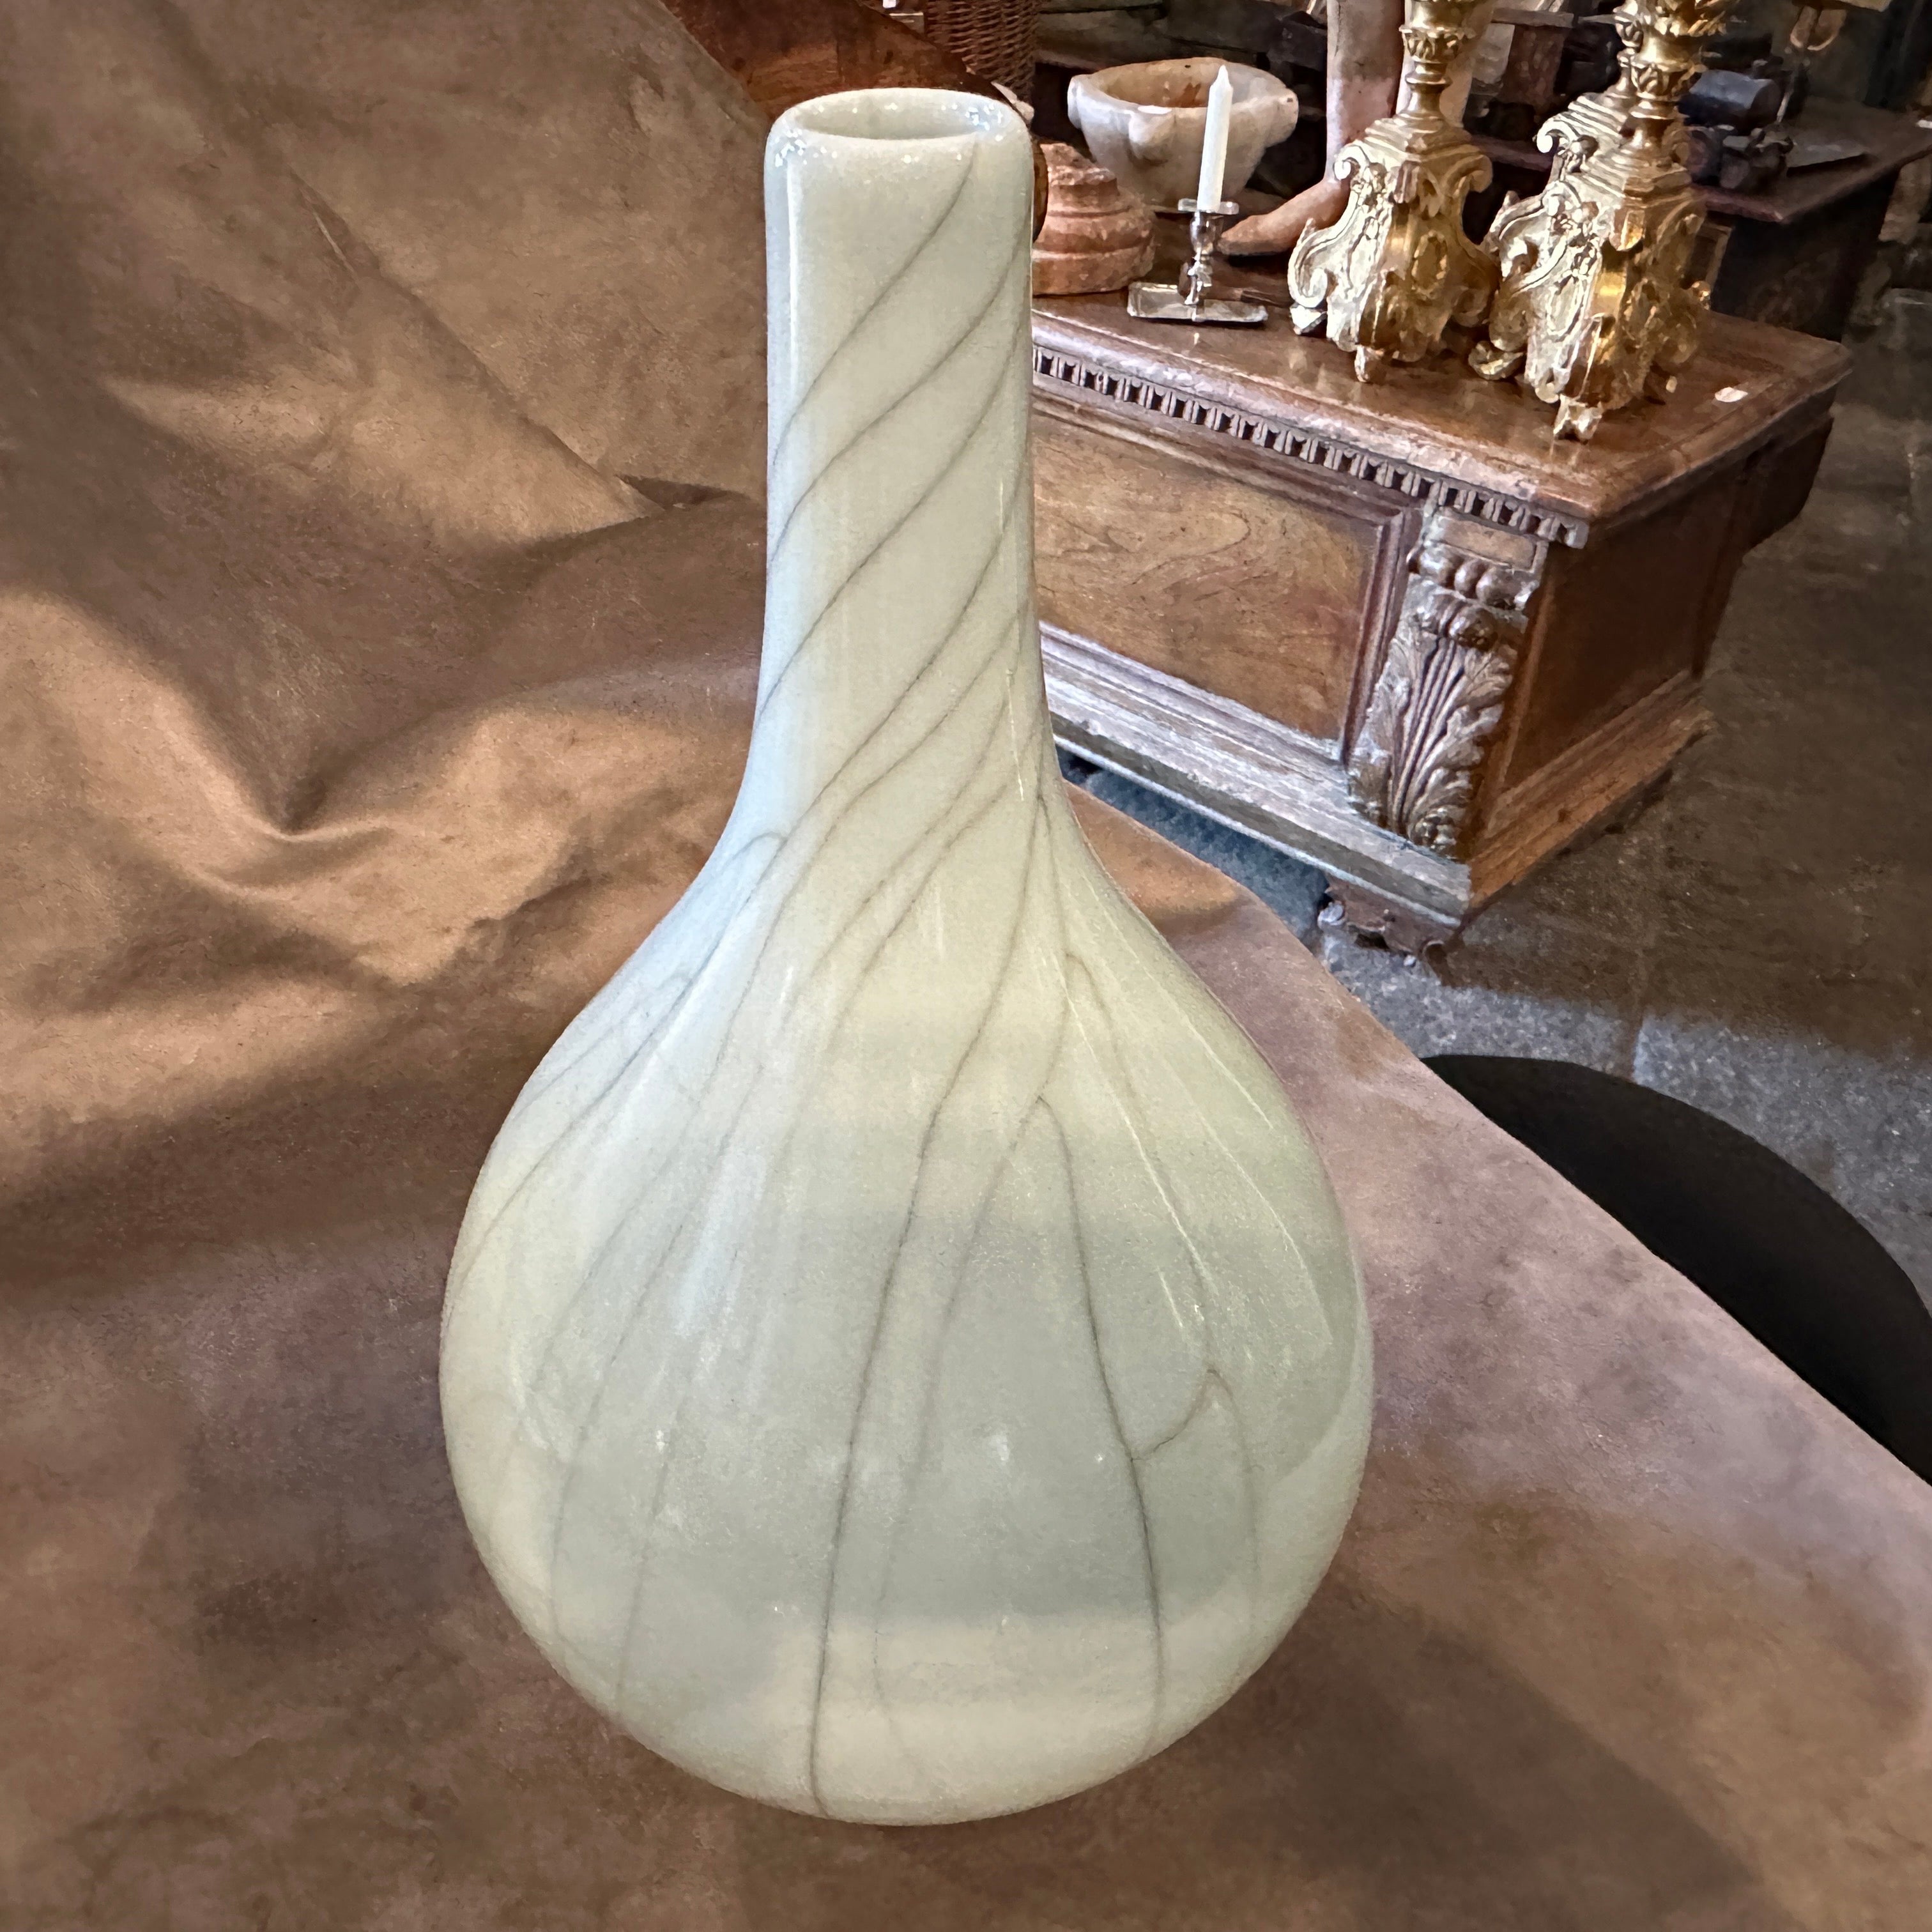 A simple and elegant round Celadon vase manufactured in China in the late 19th century, the vase is covered overall with a crackled grey celadon glaze. The glaze it's smooth and even, with a slight sheen that catches the light. Celadon is a type of